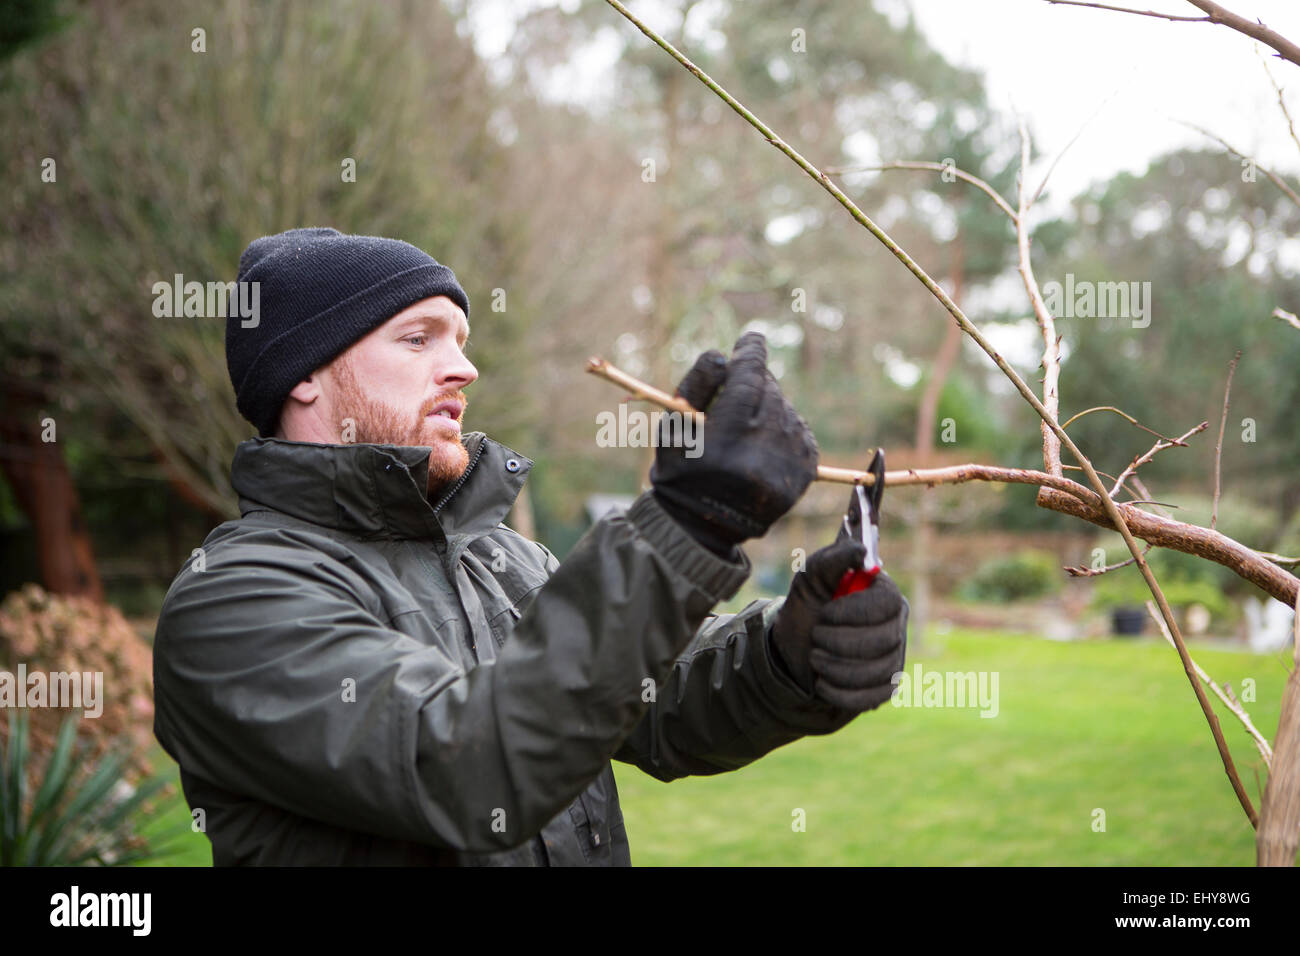 Man pruning branch of tree with shears, Bournemouth, County Dorset, UK, Europe Stock Photo